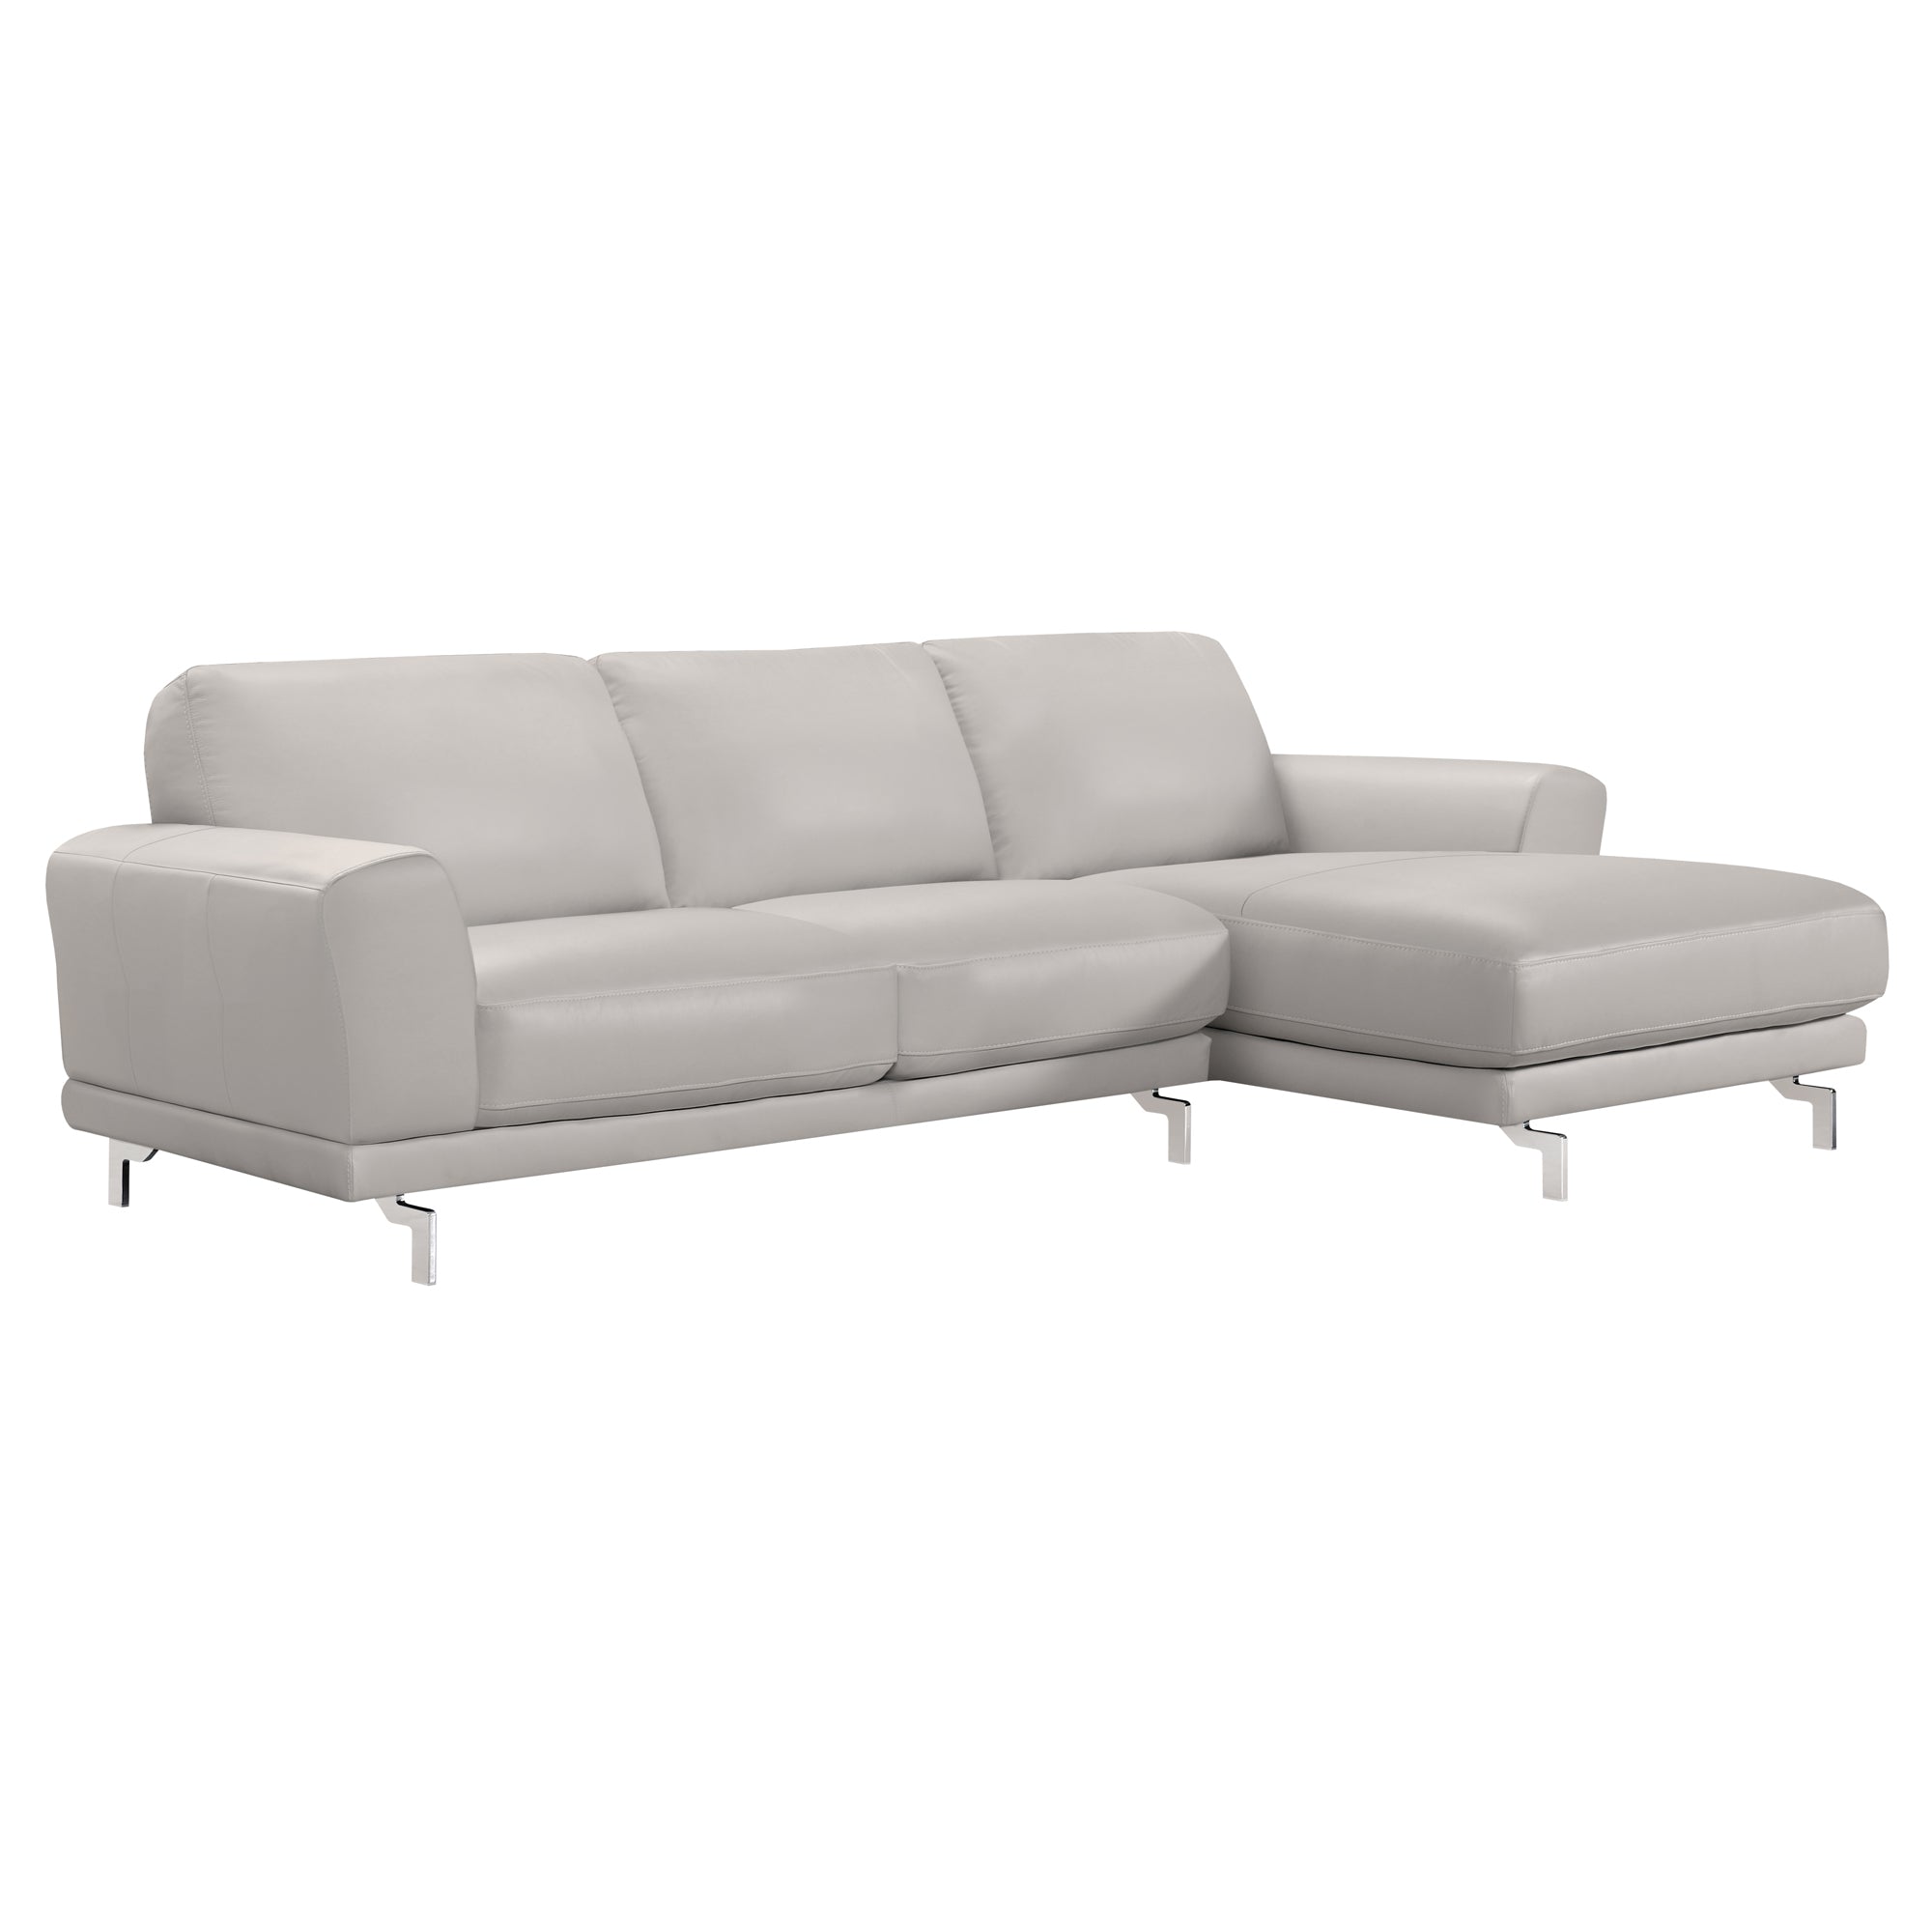 Armen Living Lcevsegr Everly Contemporary Sectional In Genuine Dove Grey Leather With Brushed Stainless Steel Legs